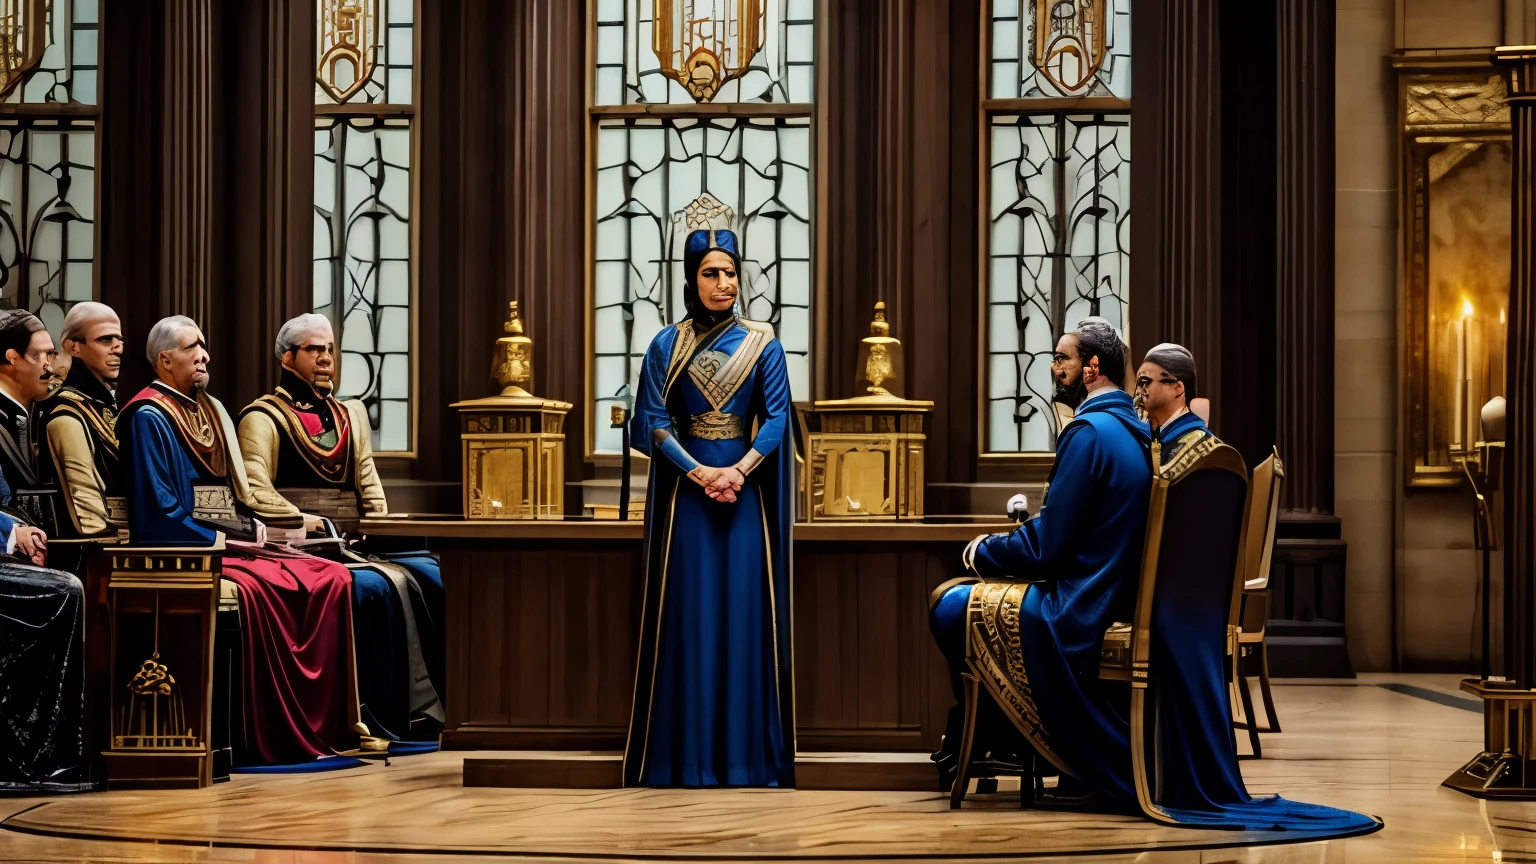 Create an immersive scene of Zenobia holding court in the great hall of her palace, surrounded by her courtiers and advisors, her presence commanding respect and admiration as she dispenses justice with wisdom and authority